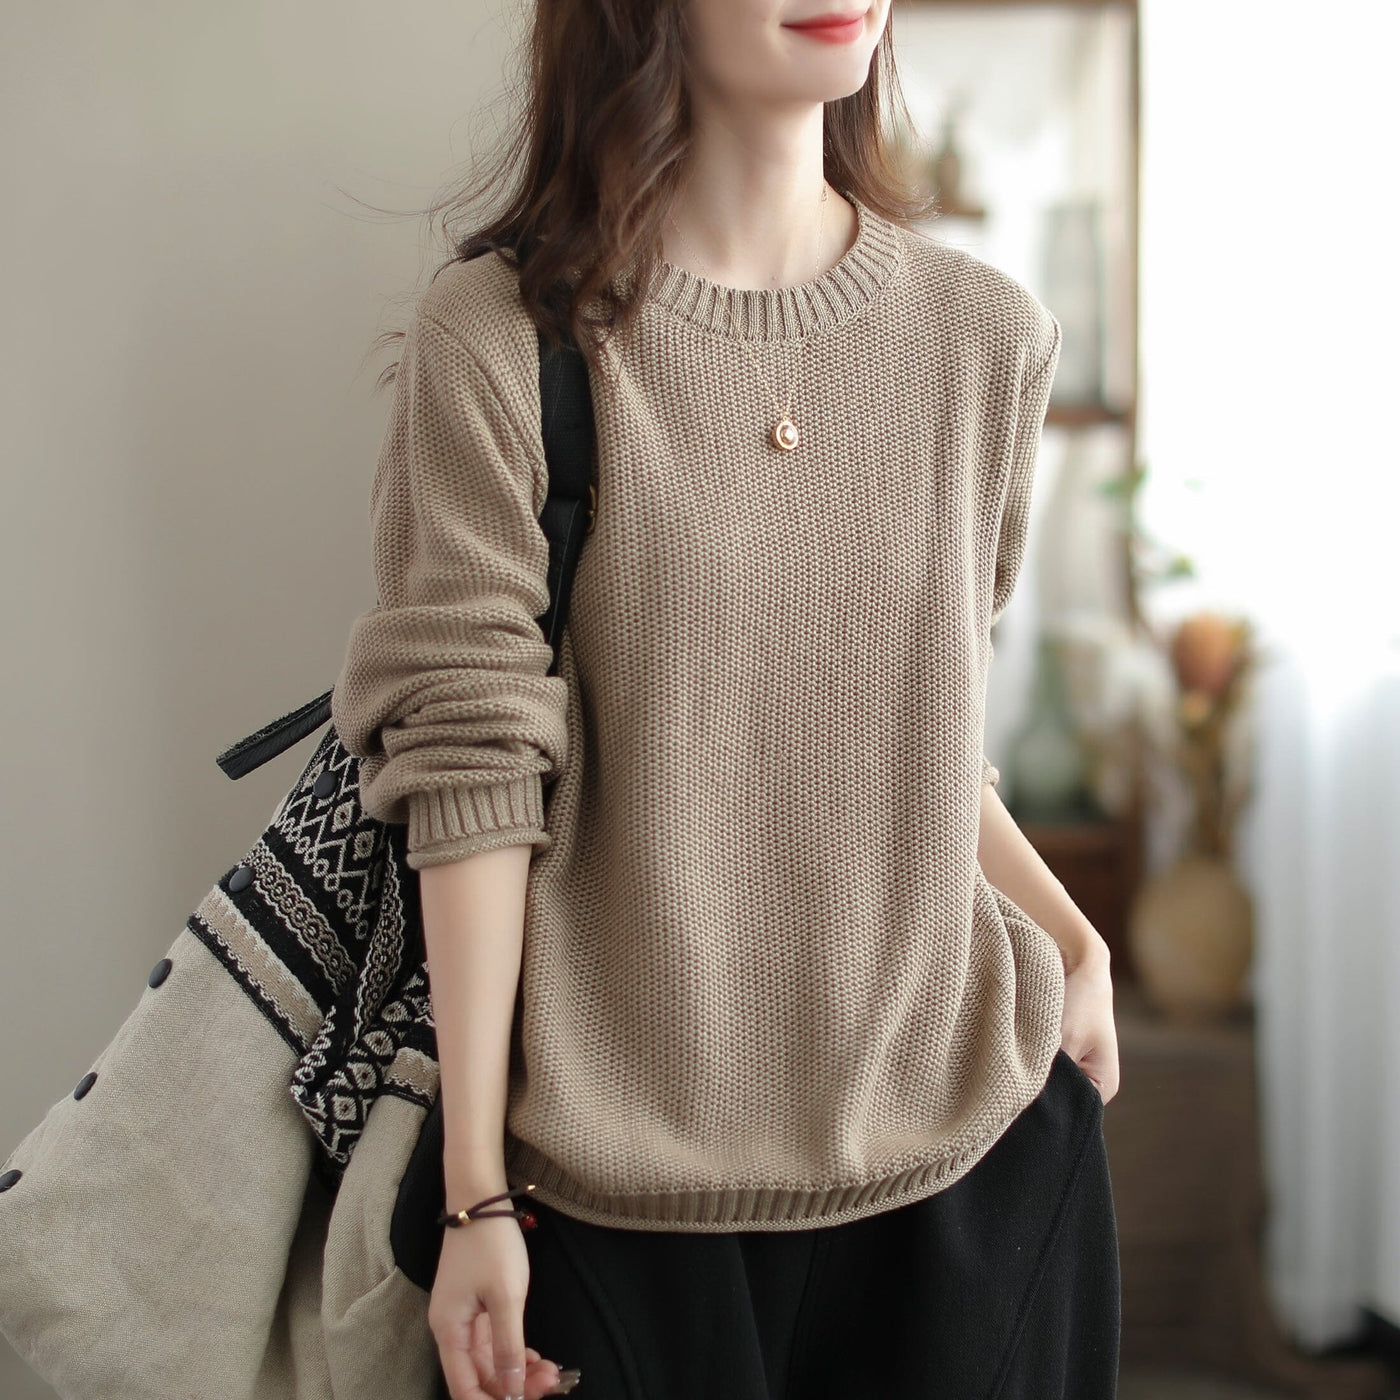 Autumn Winter Casual Loose Knitted Cardigan